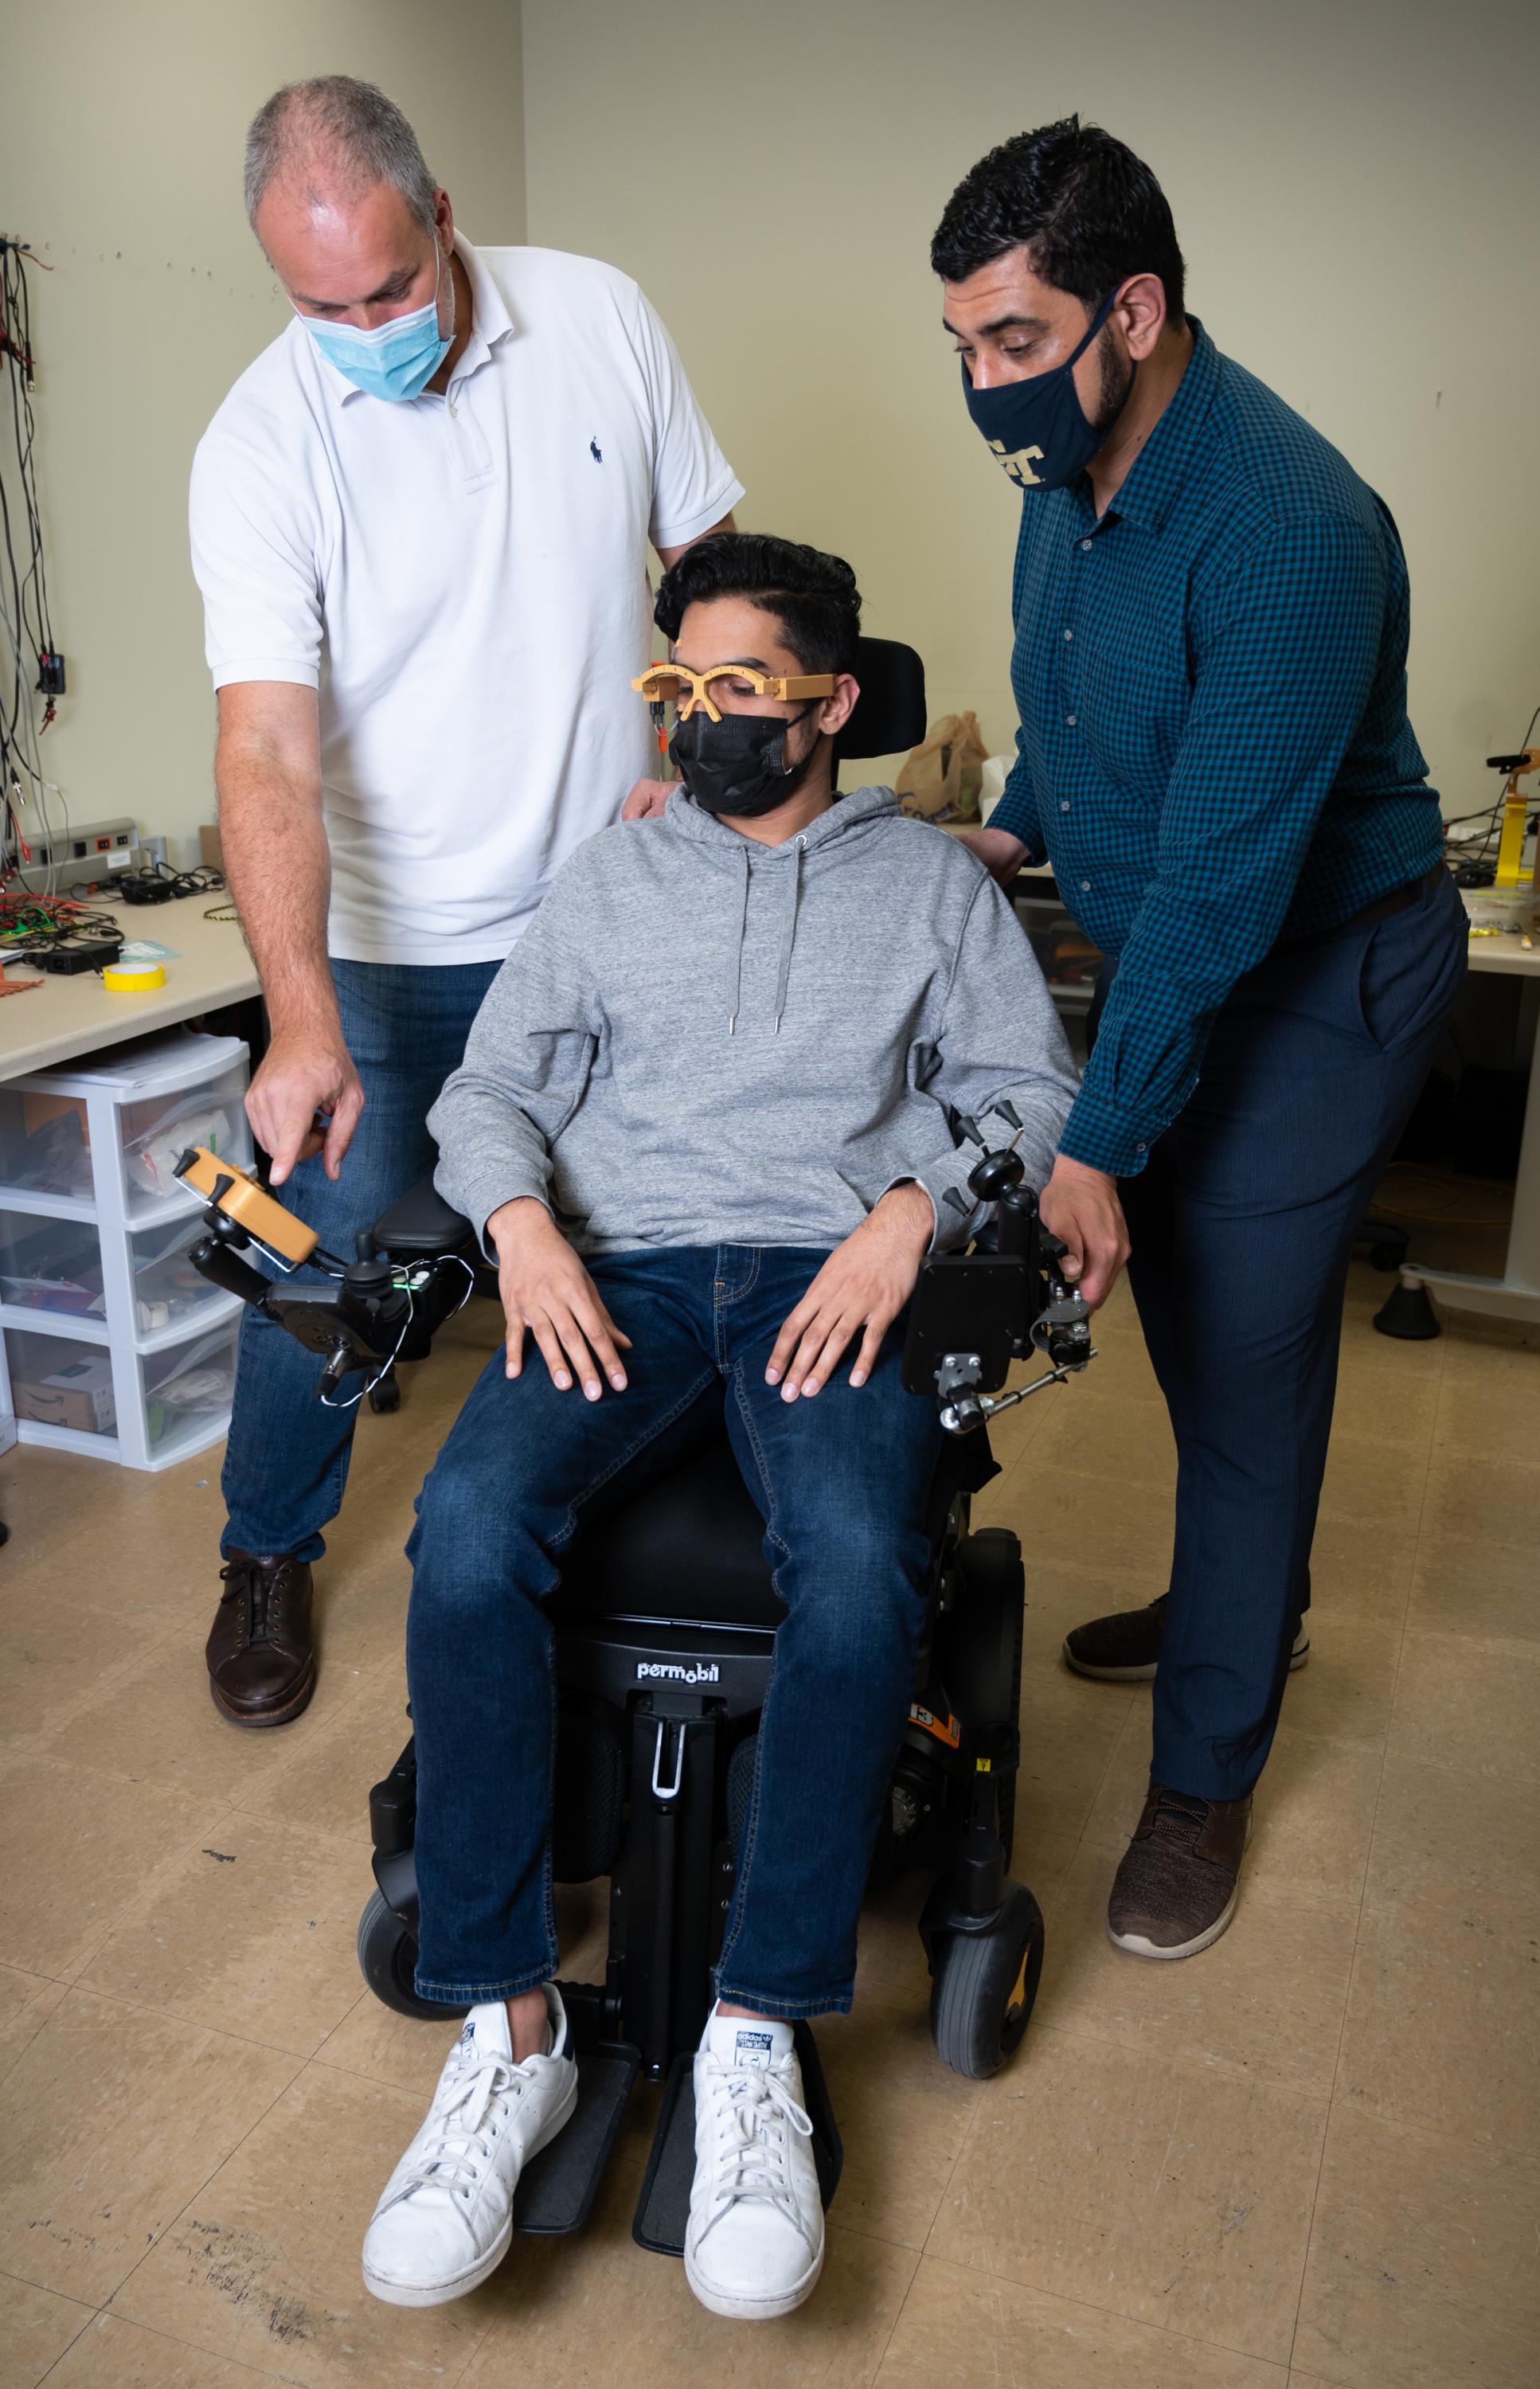 Researcher testing MagTrack on man with paralysis